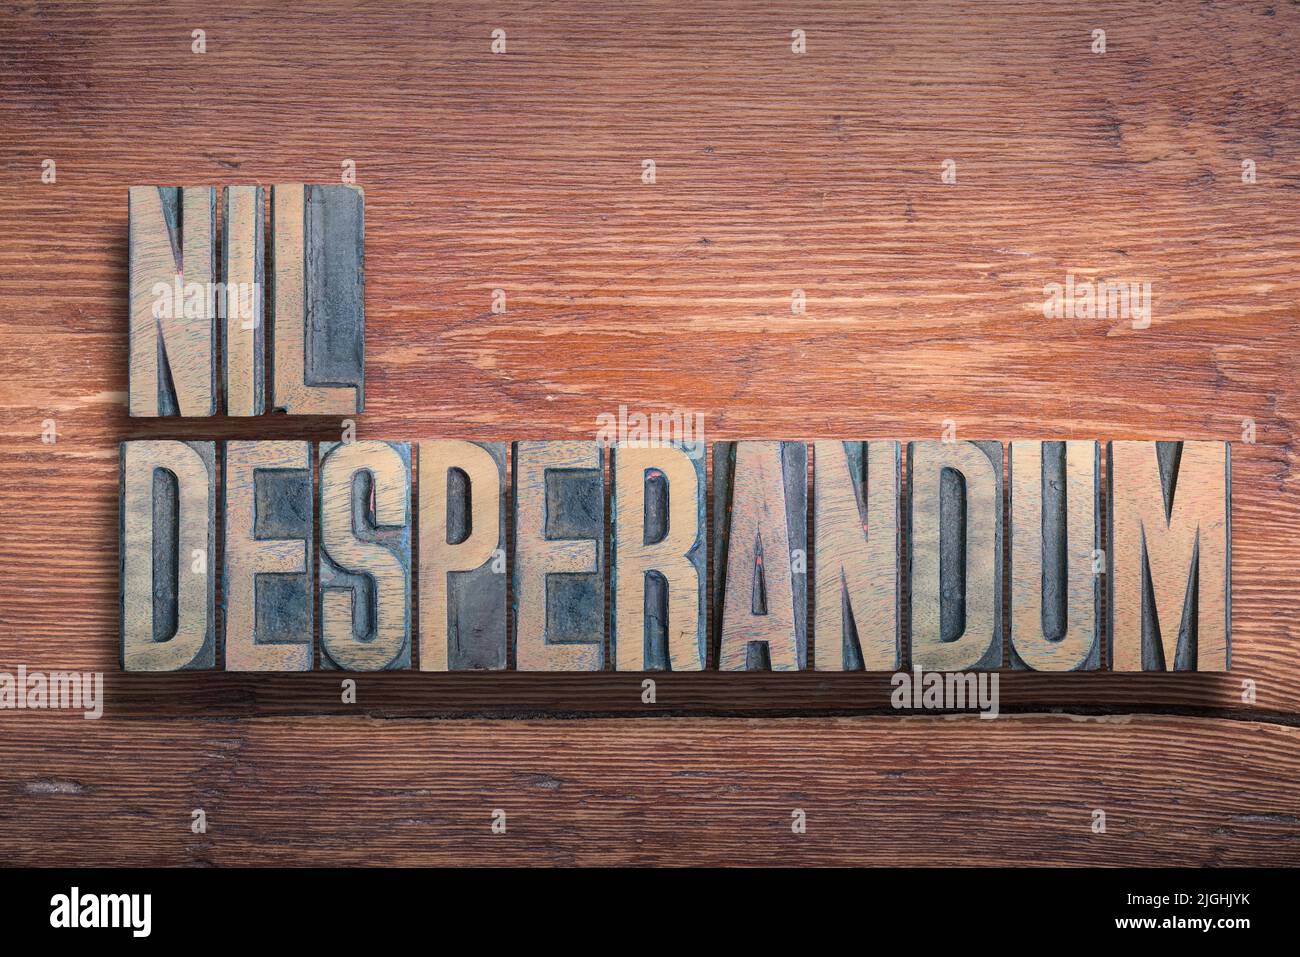 Nil desperandum ancient Latin saying meaning - Never despair, combined on vintage varnished wooden surface Stock Photo